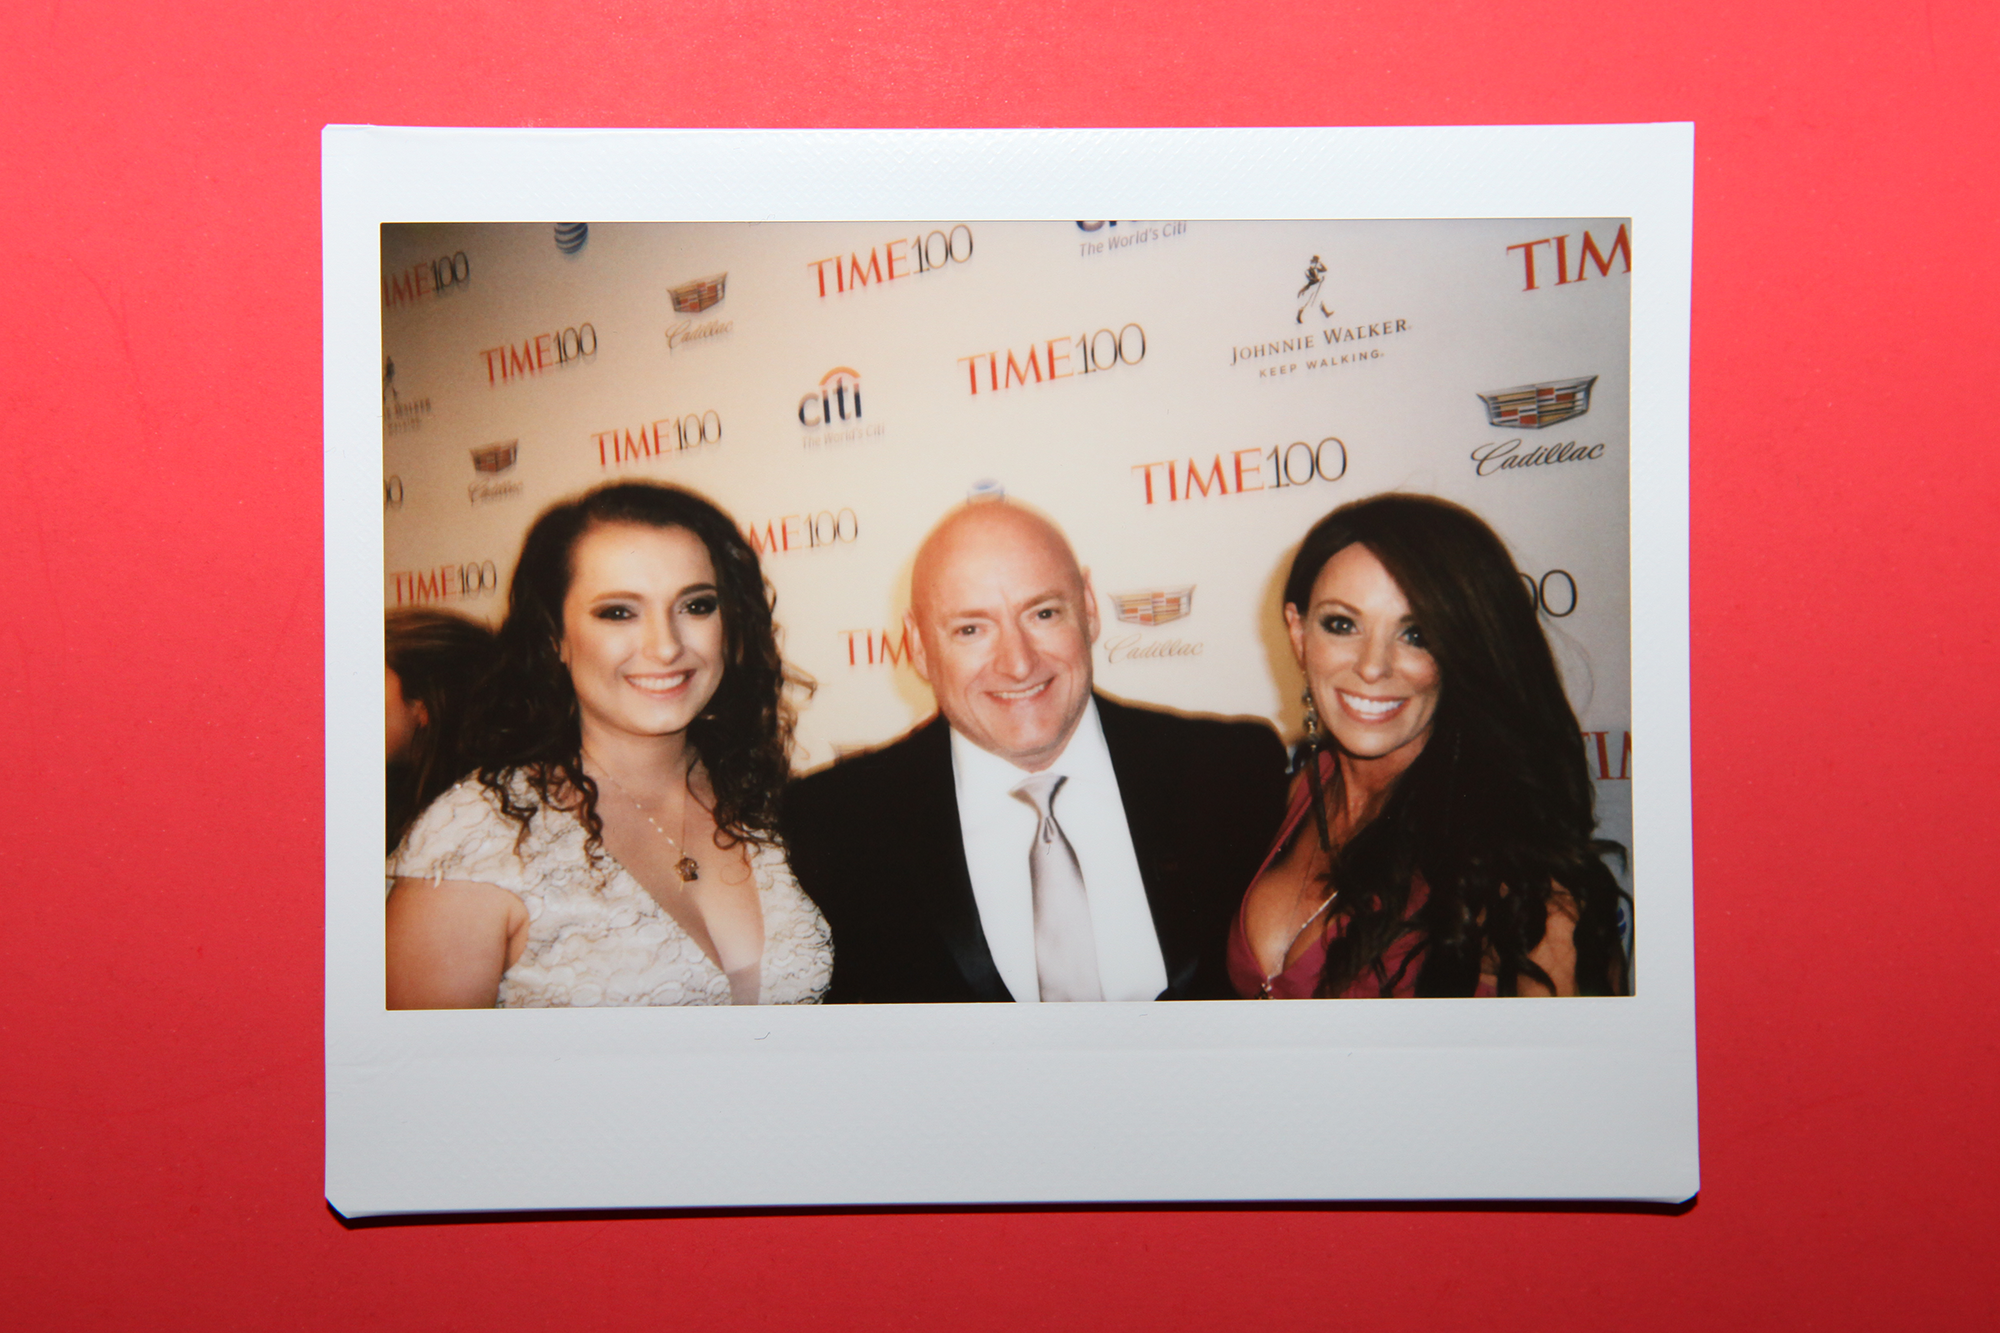 From left: Samantha Kelly, Scott Kelly, and Amiko Kauderer  arrive at the TIME 100 Gala at the Time Warner Center on April 26, 2016 in New York City.